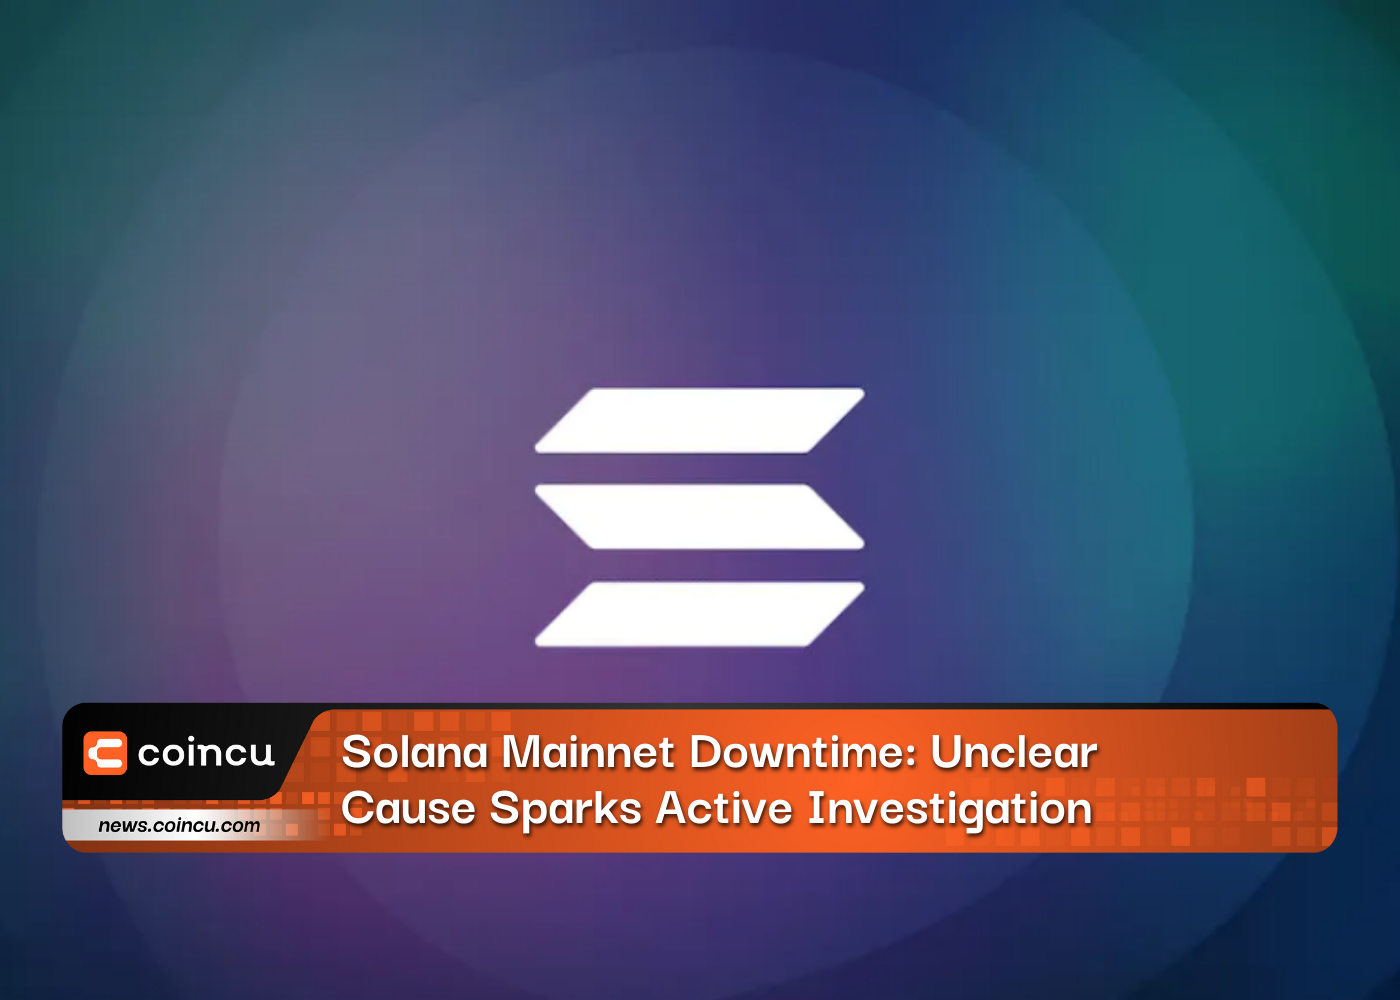 Solana Mainnet Downtime: Unclear Cause Sparks Active Investigation